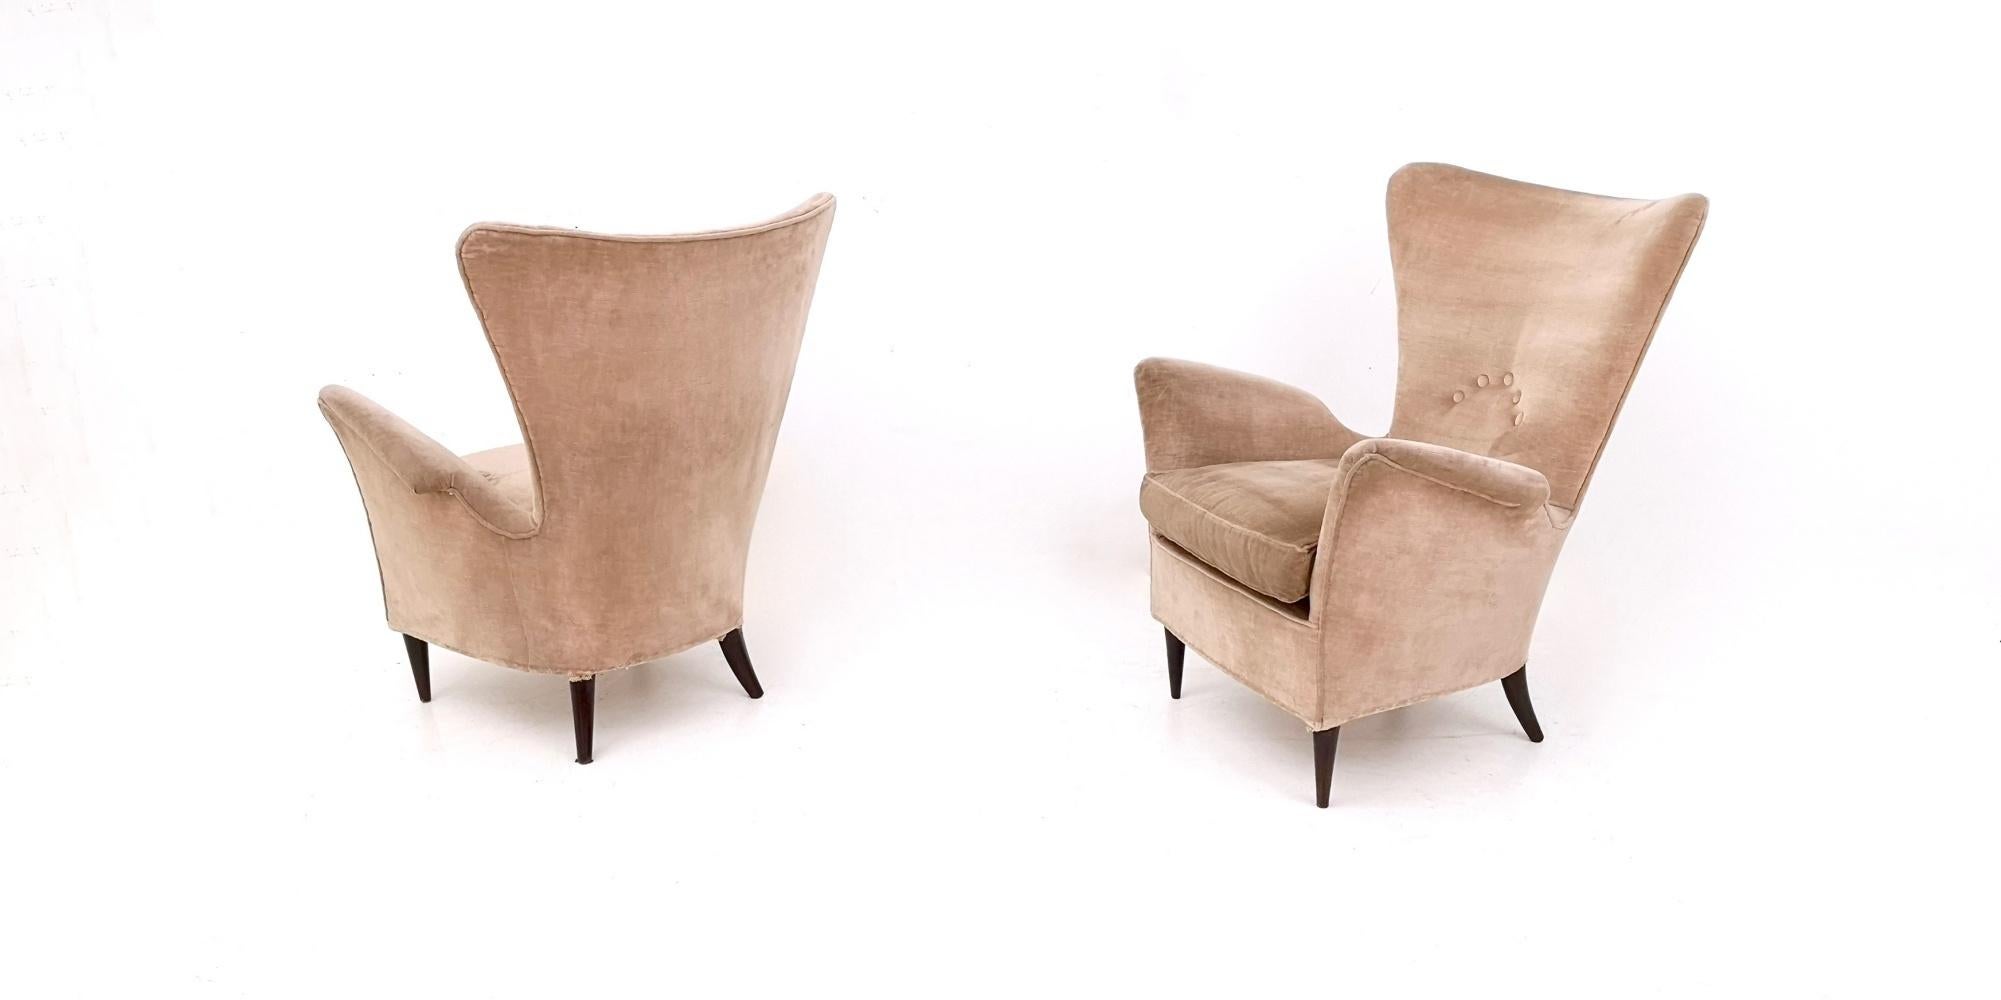 Pair of Beige Velvet Armchairs Ascribable to Gio Ponti for Hotel Bristol